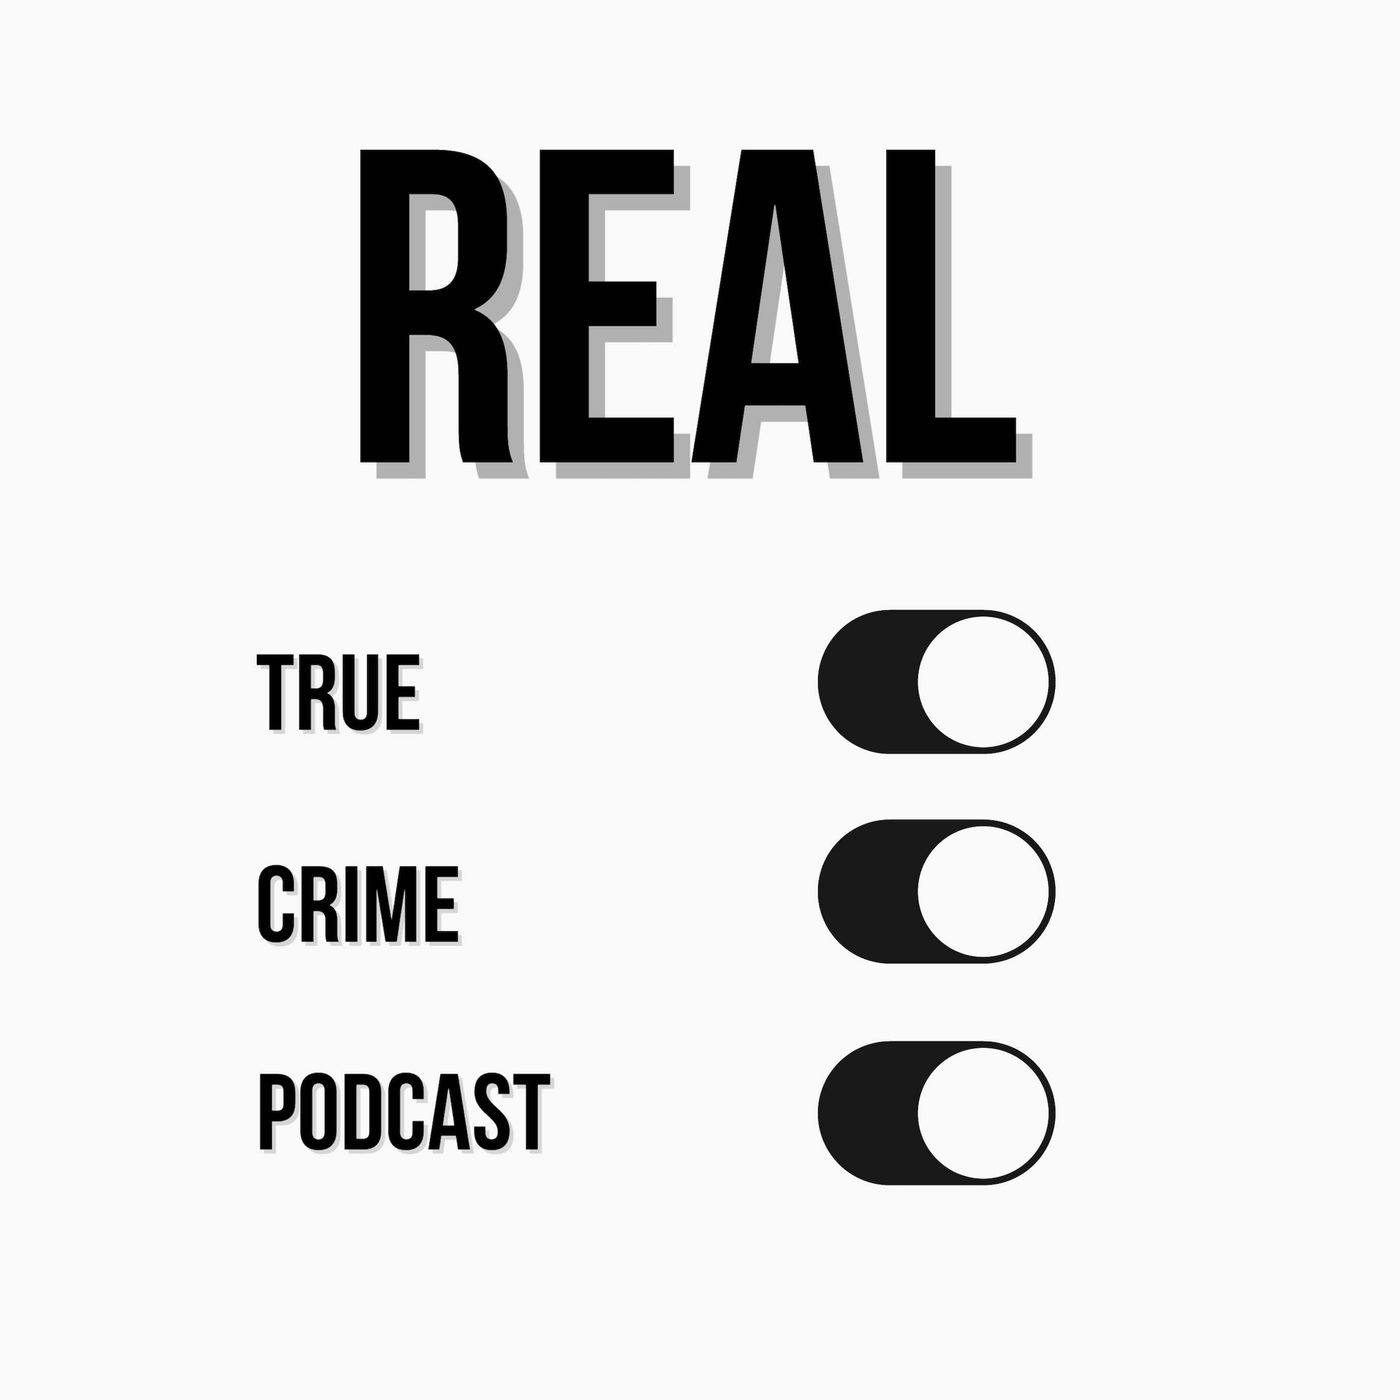 Episode 36: Catching A UK Serial Killer - The Crimes of Levi Bellfield